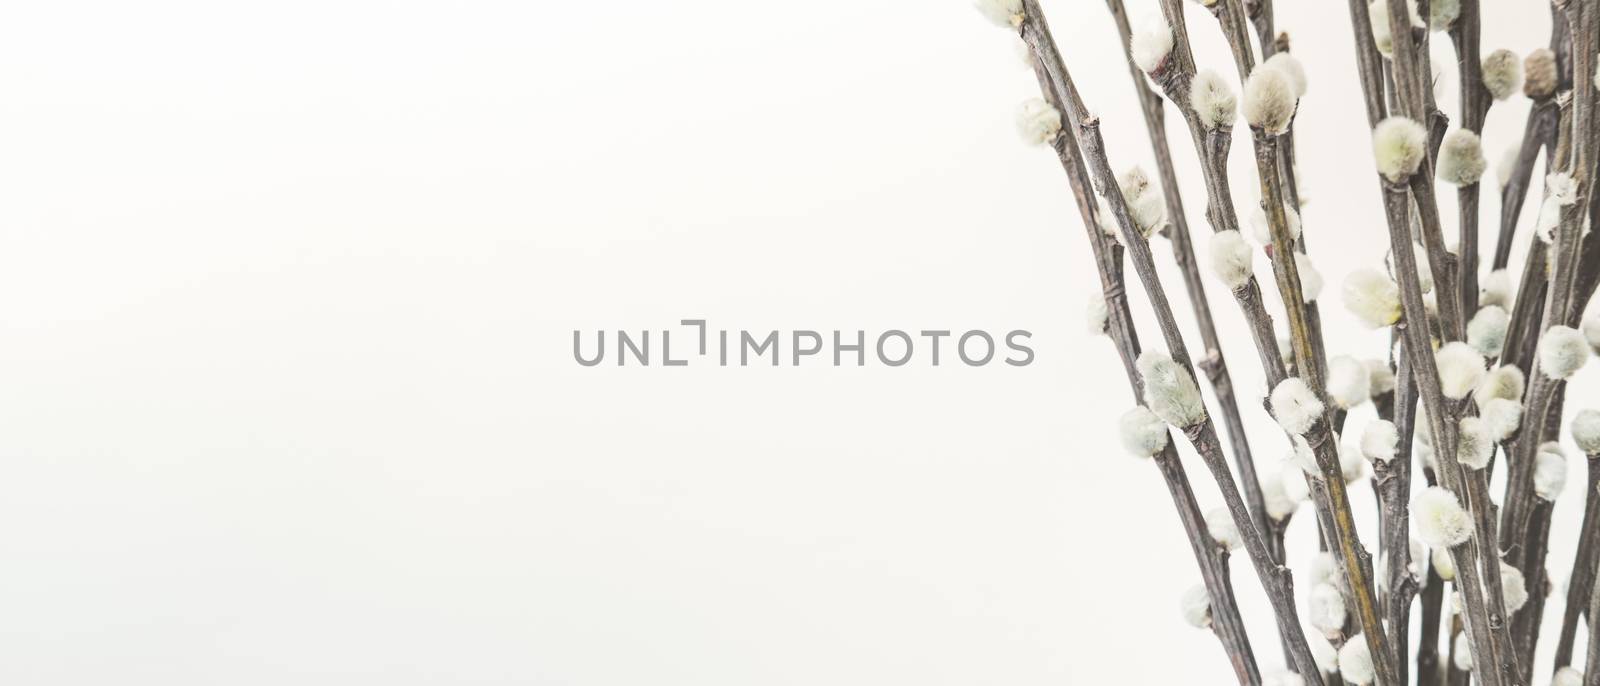 Branches with buds, close-up view. by photoboyko